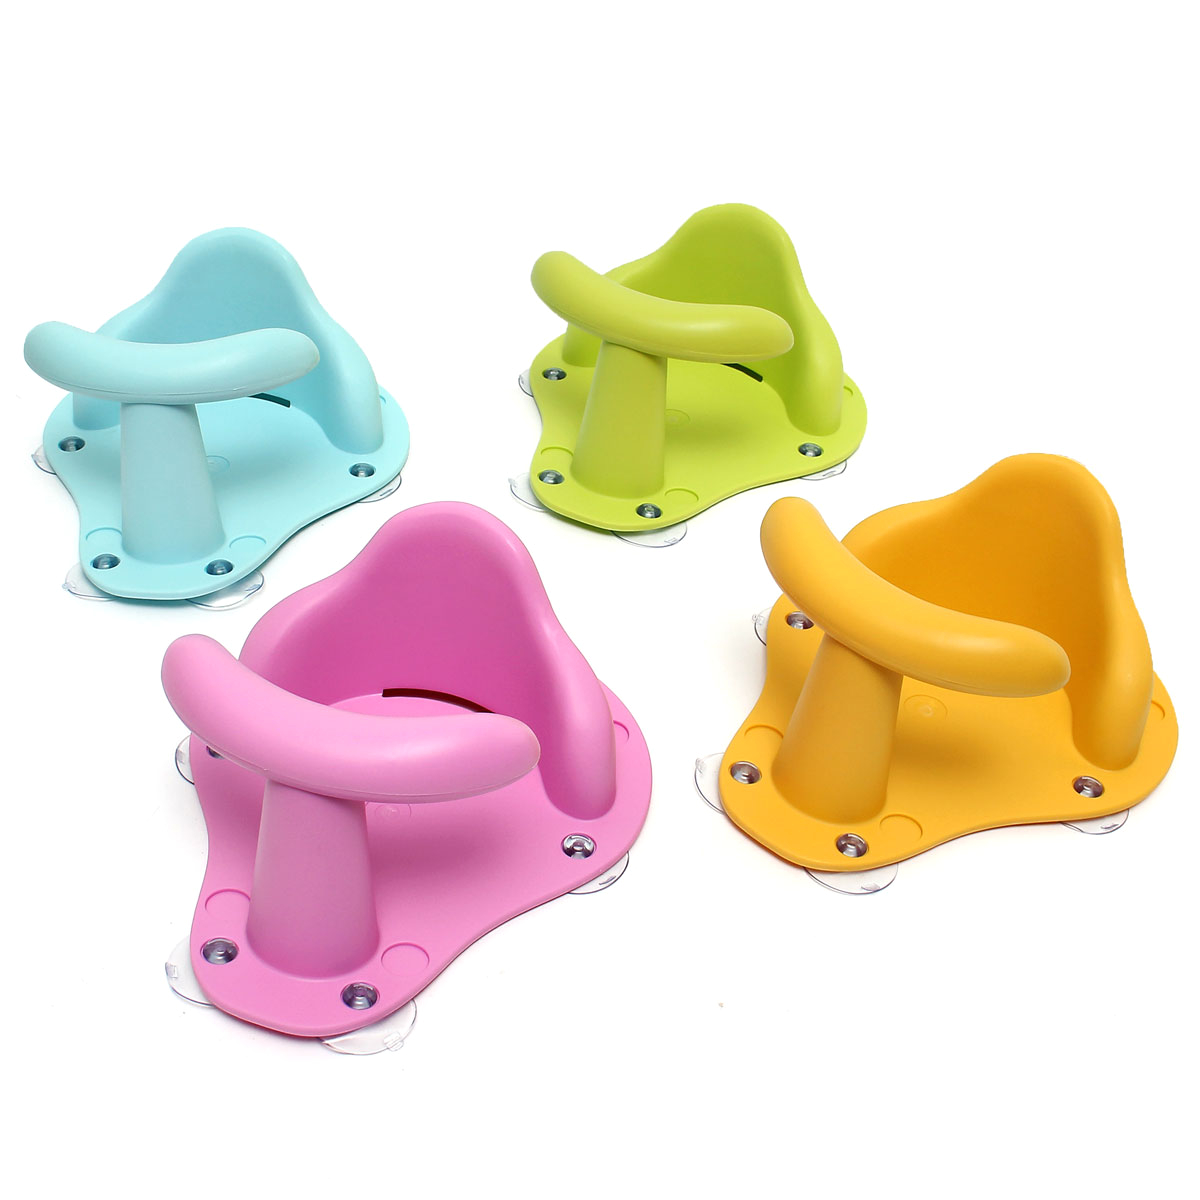 4 colors baby bath tub ring seat infant children shower toddler kids anti slip security safety chair